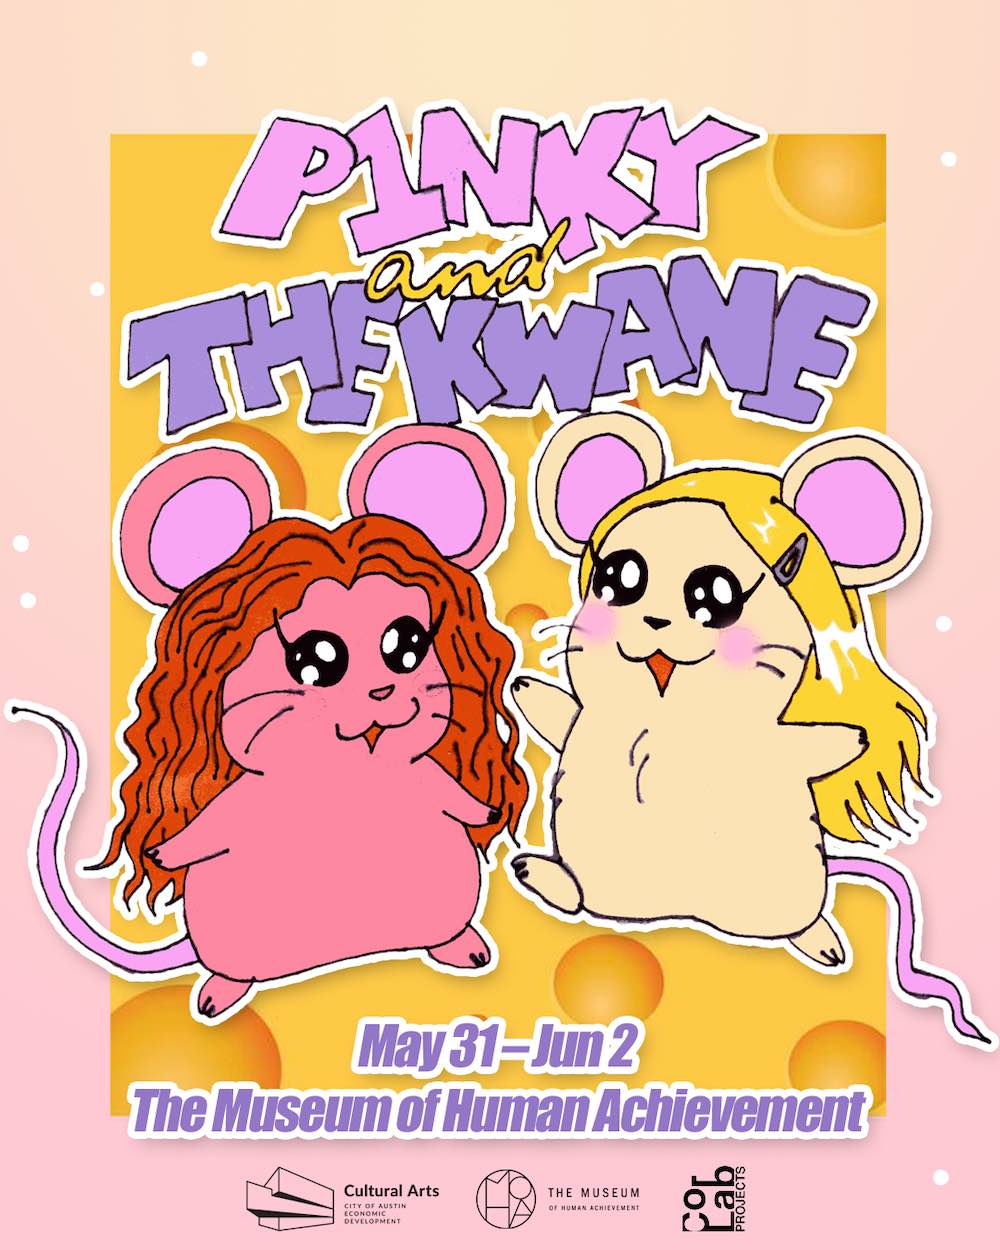 Pinky and the Kwane by pinkstar and y2k